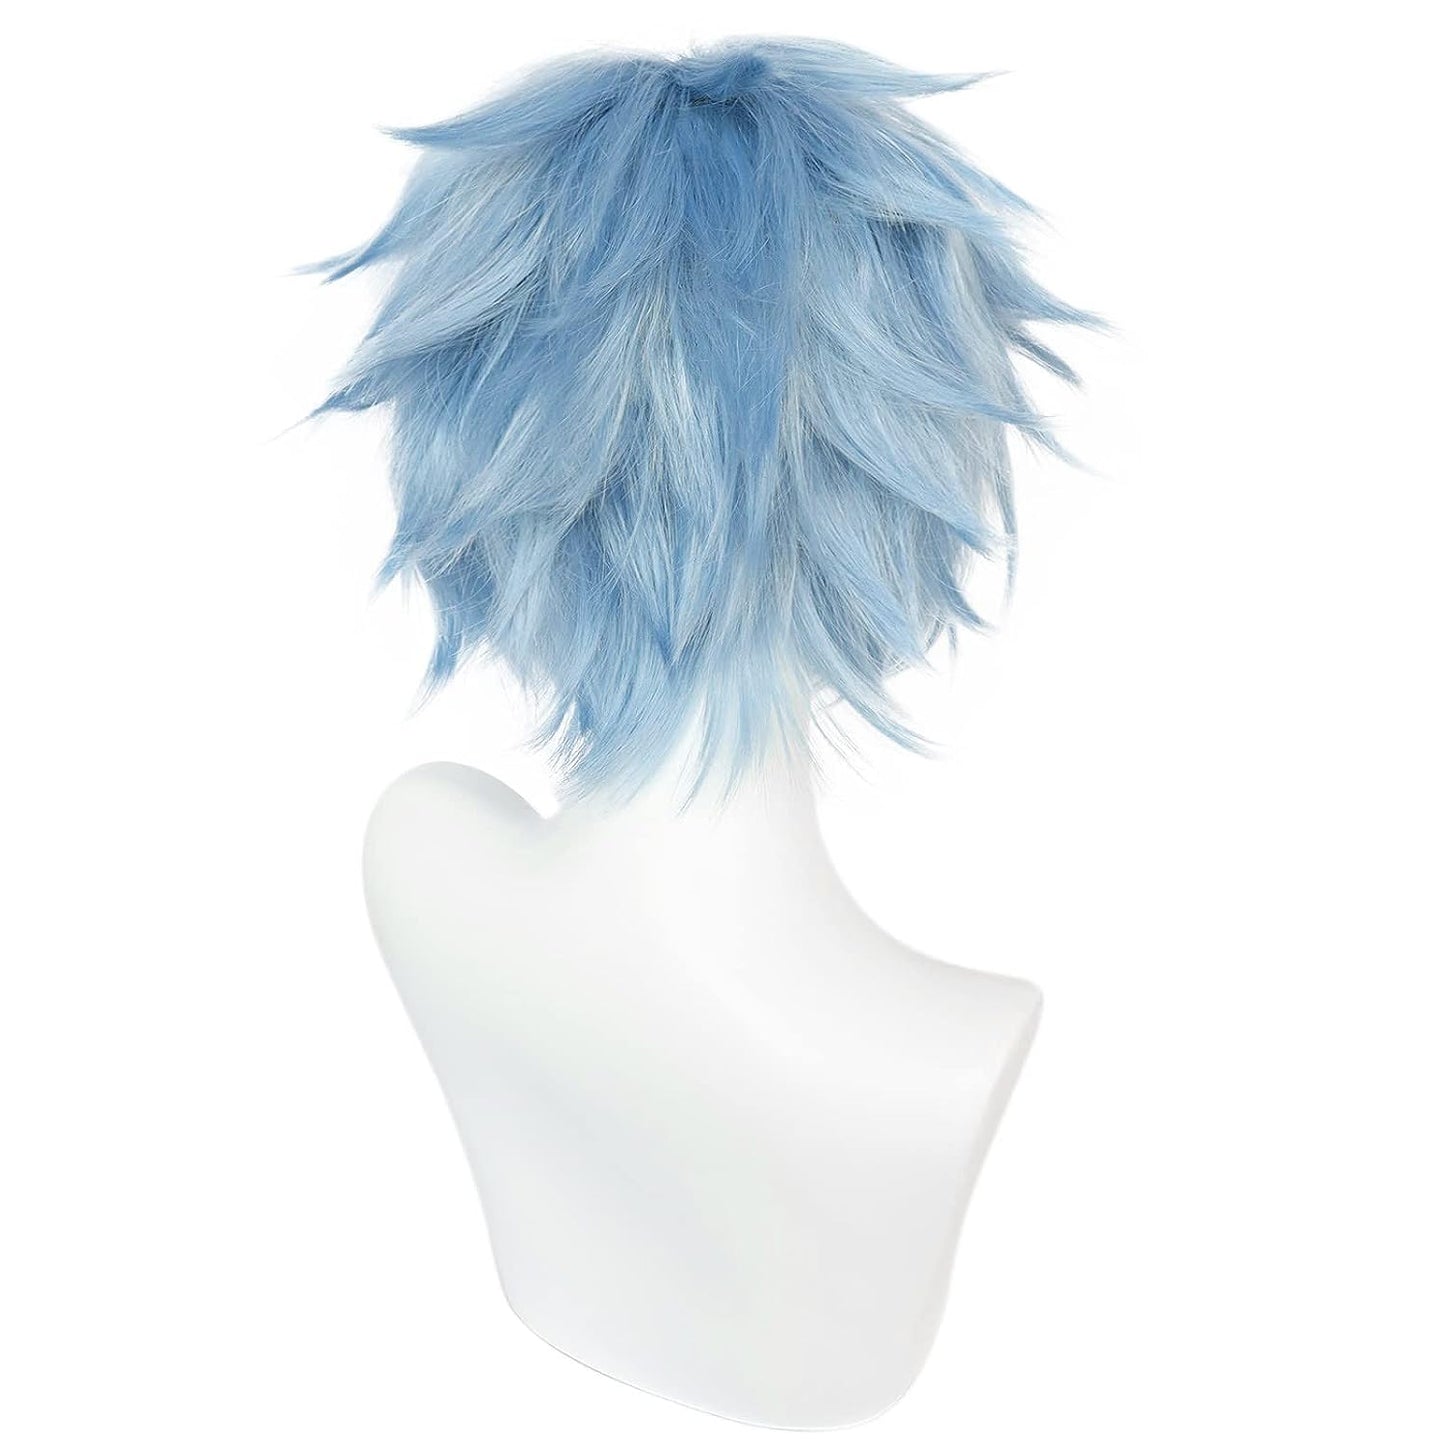 Transform into Tomura Shigaraki: Get the Perfect Look with Our Blue Cosplay Wig!